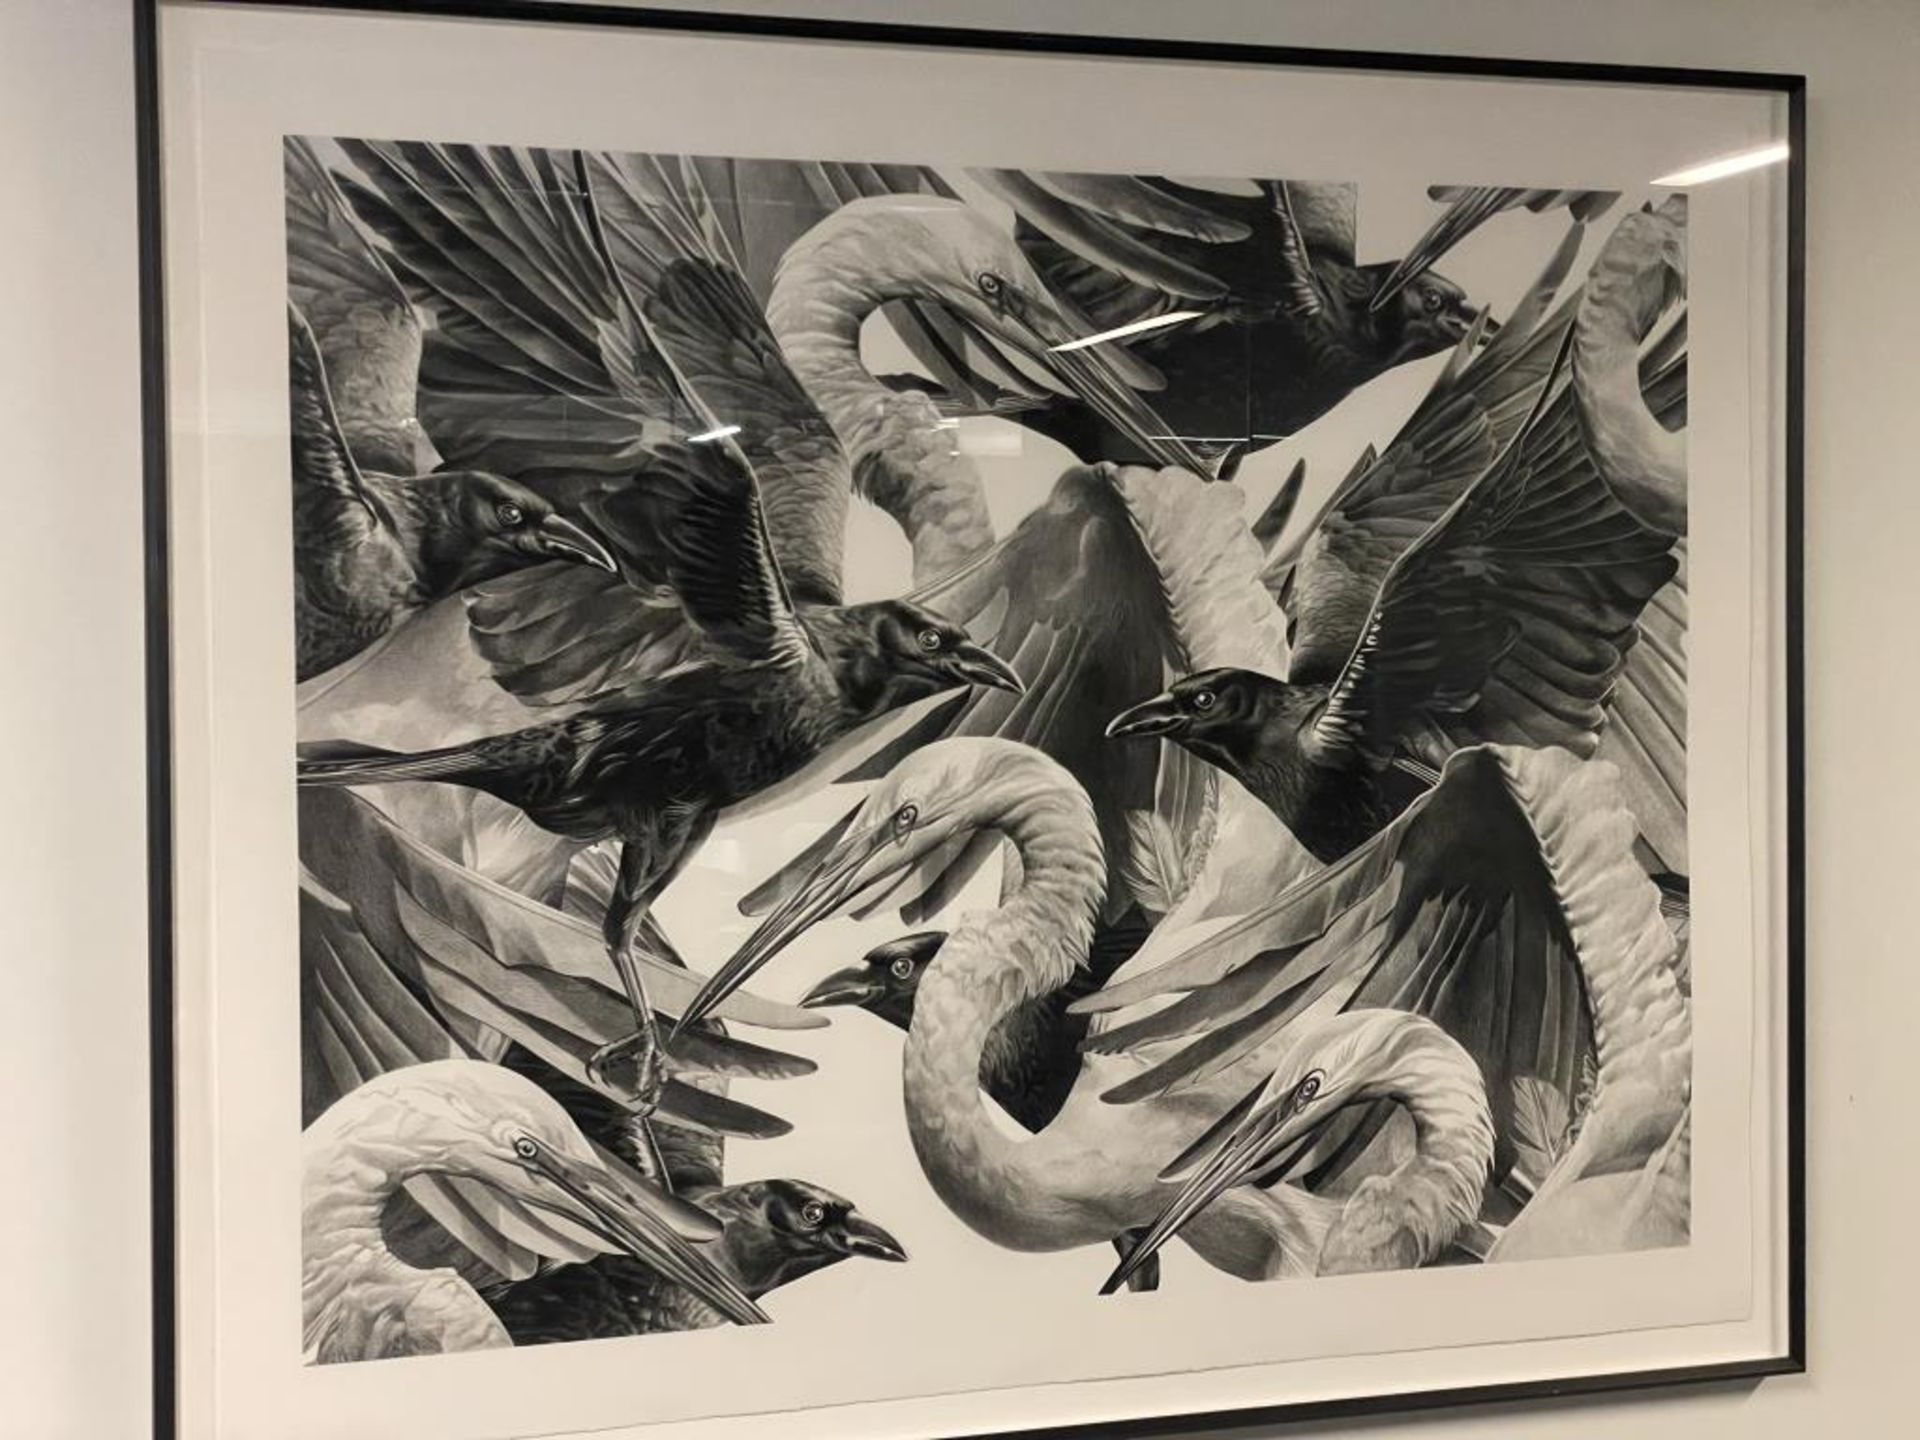 Christina Empedocles "Crows and Cranes" Wax Pencil on Paper - Image 2 of 6